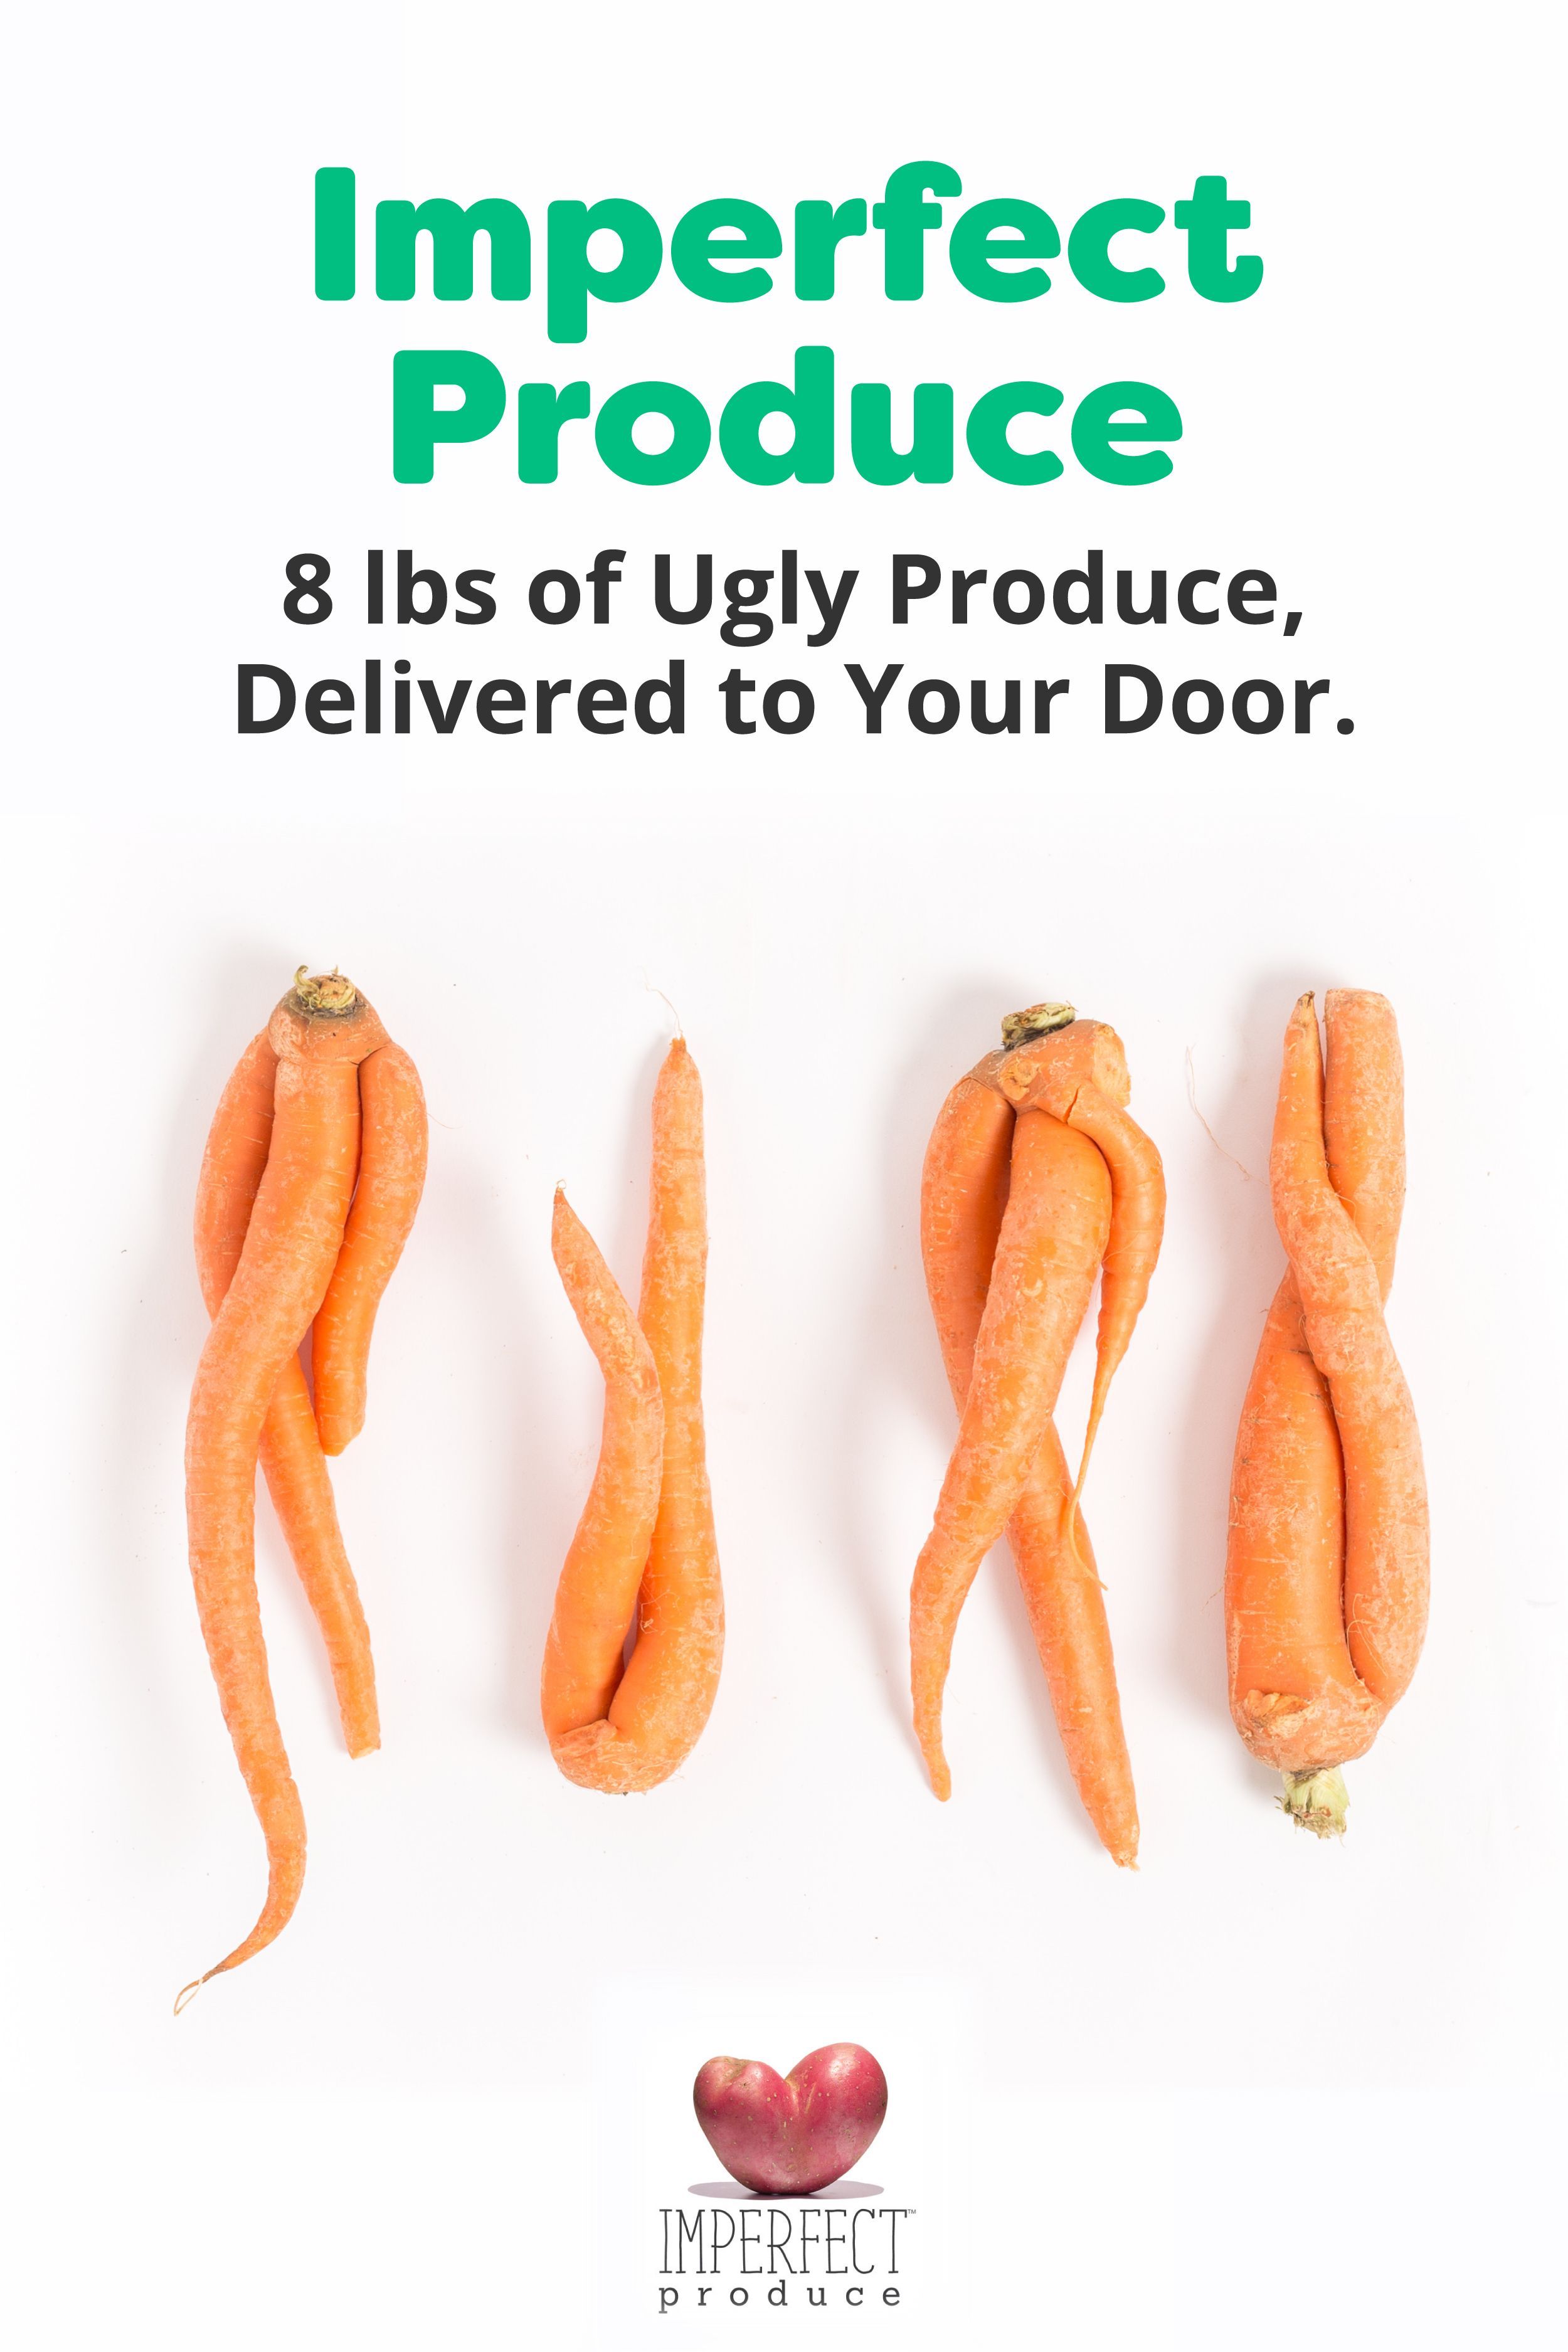 Did you know that 1 in 5 pieces of produce end up being wasted because they're not pretty enough? This perfectly healthy, delicious produce is rejected by grocery stores because of its cosmetic quirks--its too big, too small, or oddly shaped. Enter Imperfect. We buy this produce direct from farms and deliver it to your doors for 30%-50% cheaper than grocery stores. You can save money and eat healthy, while helping farmers, and join us in our mission to reduce food waste! -   21 desserts Gluten Free coconut flour
 ideas